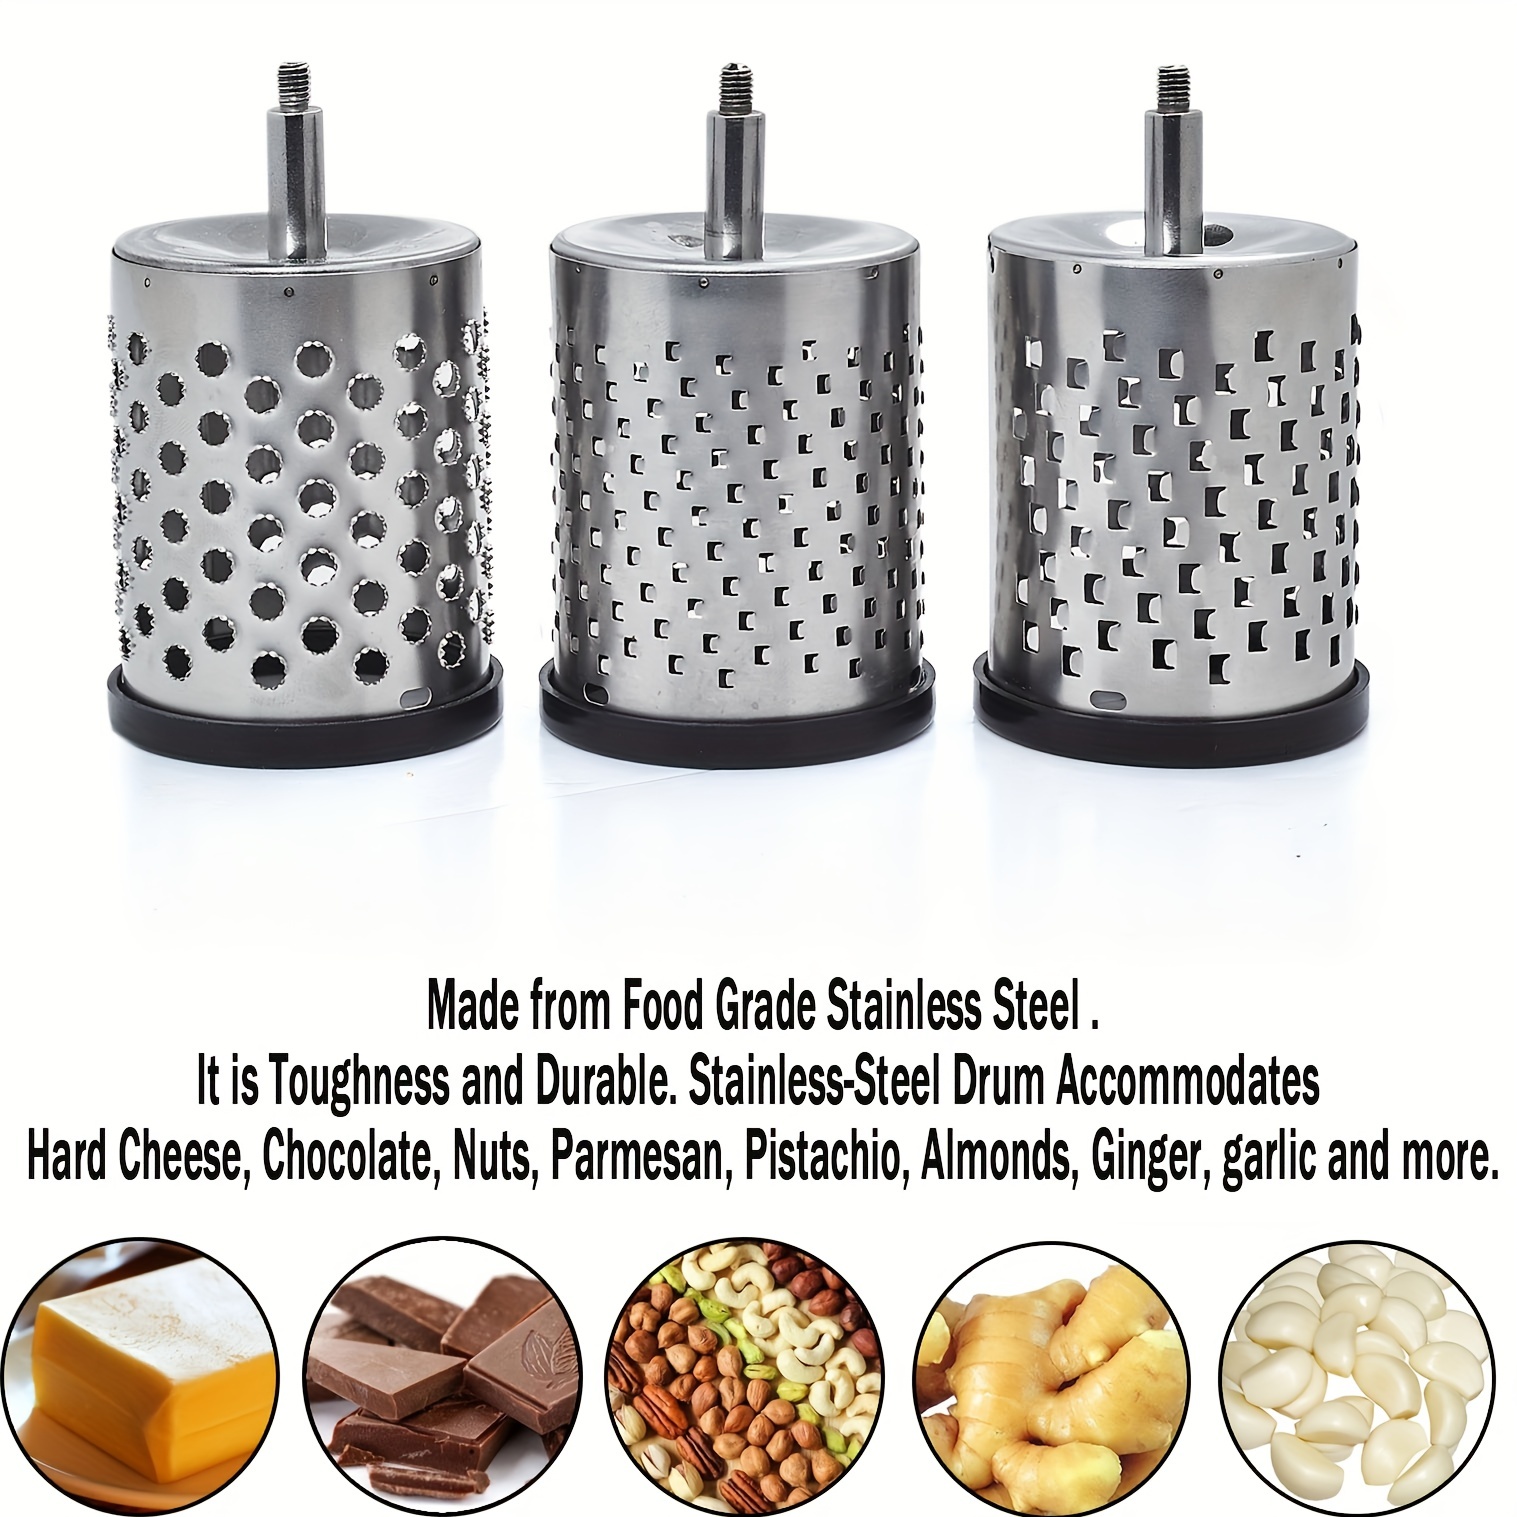  New Land Professional Stainless Steel Grater for Spice